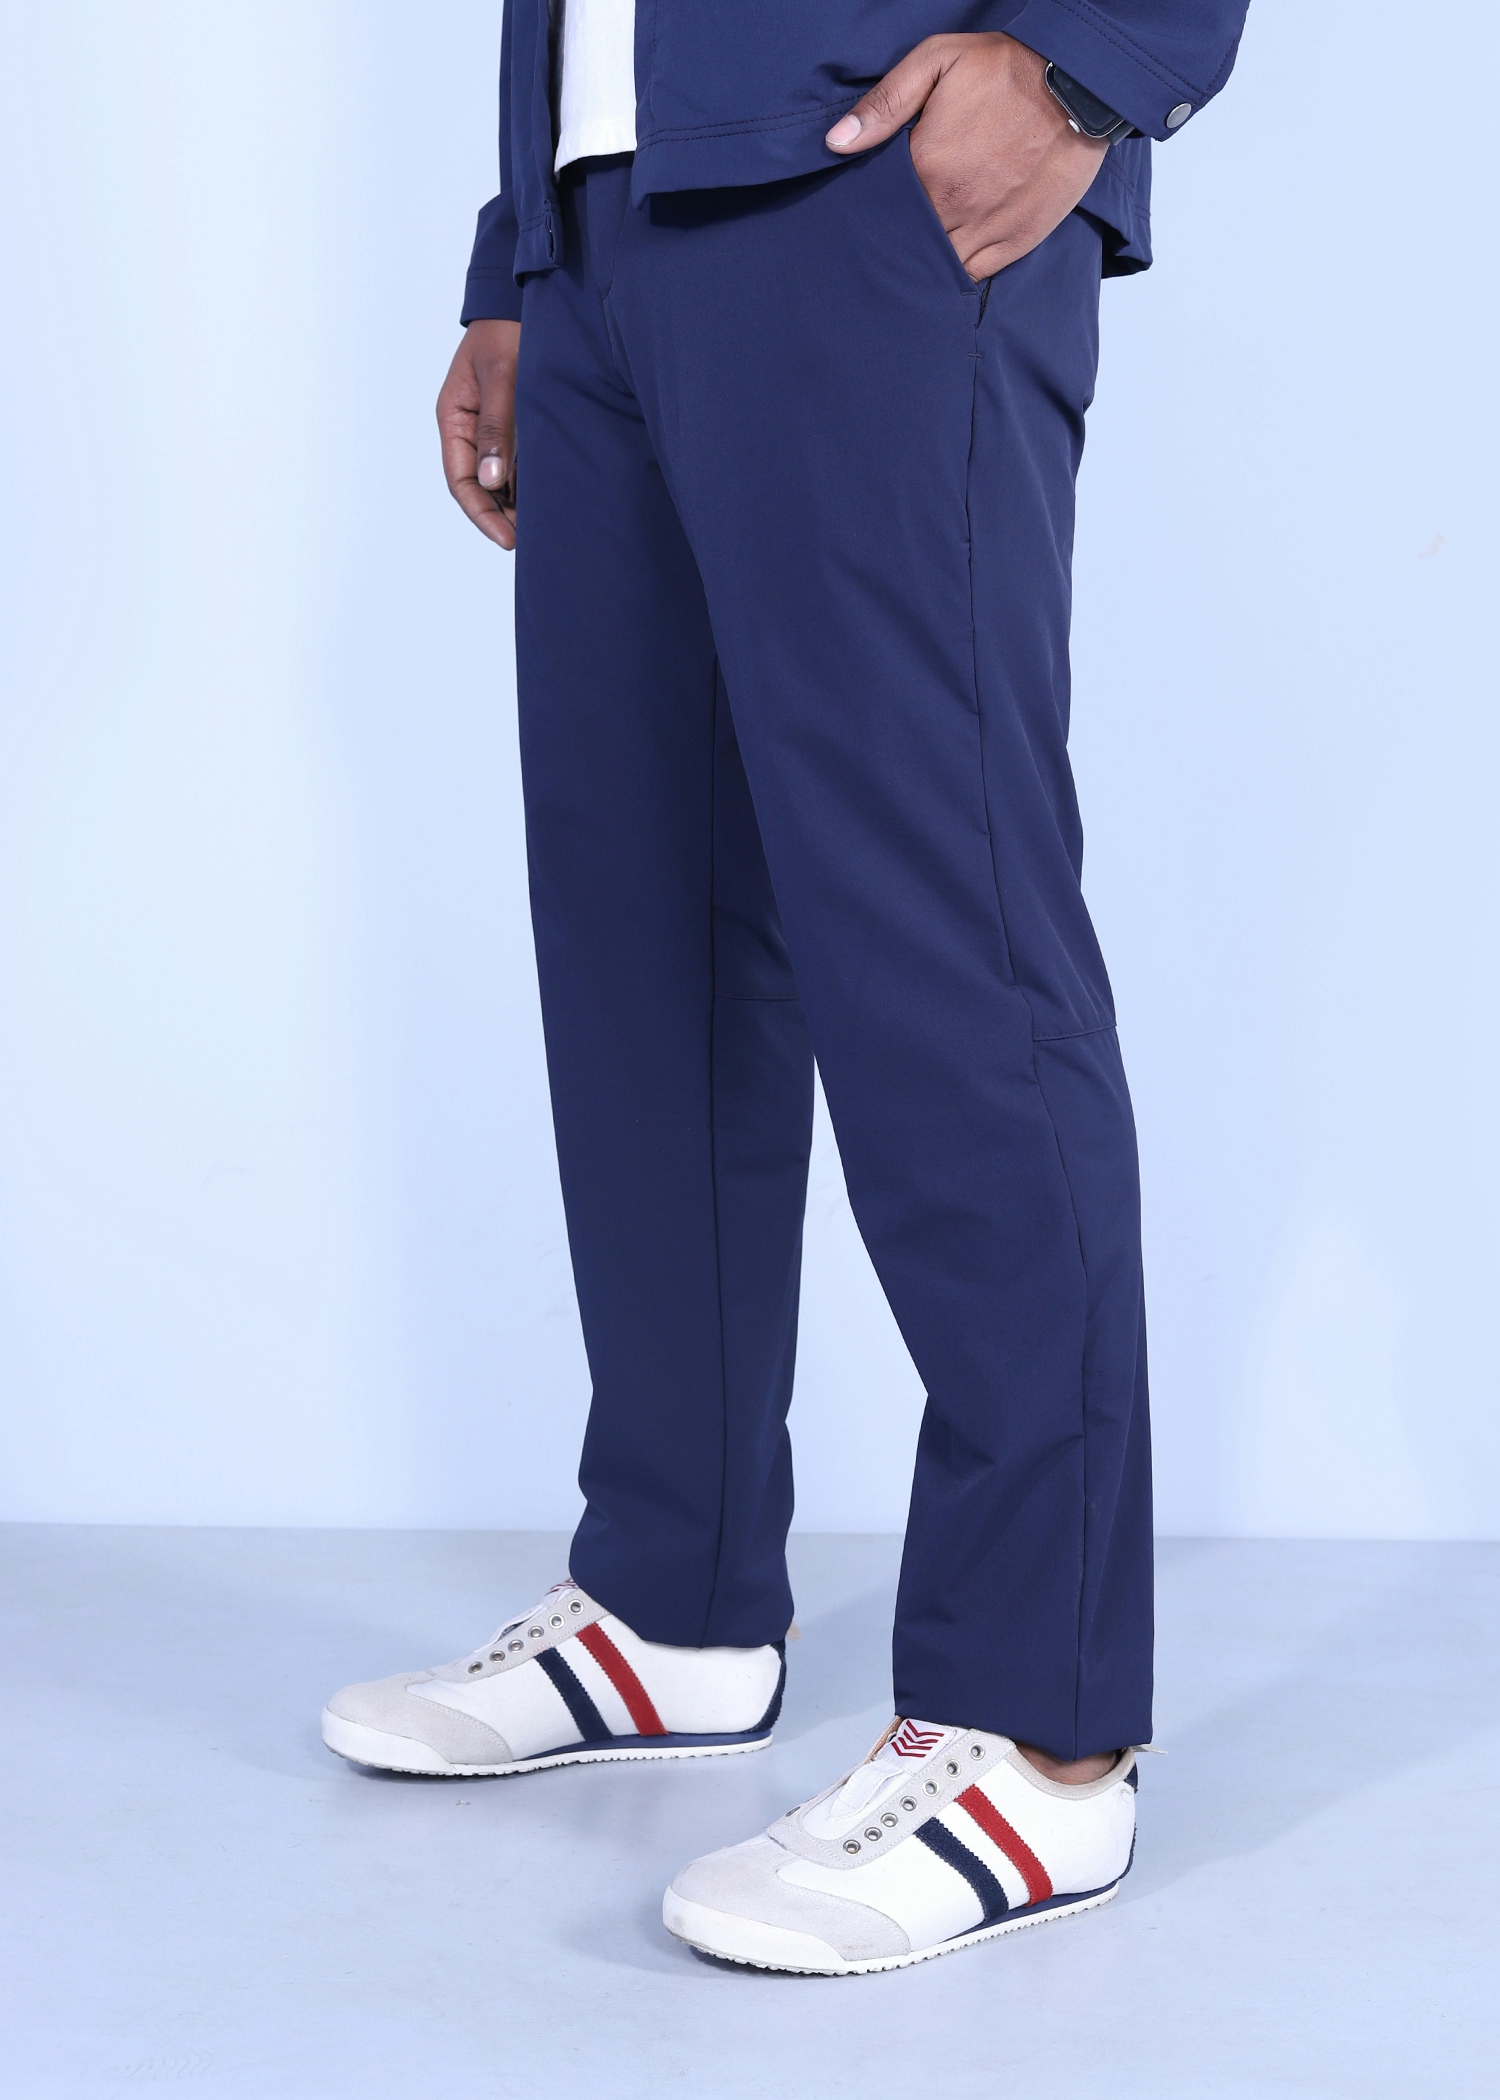 wagtail chino pant navy color half side view